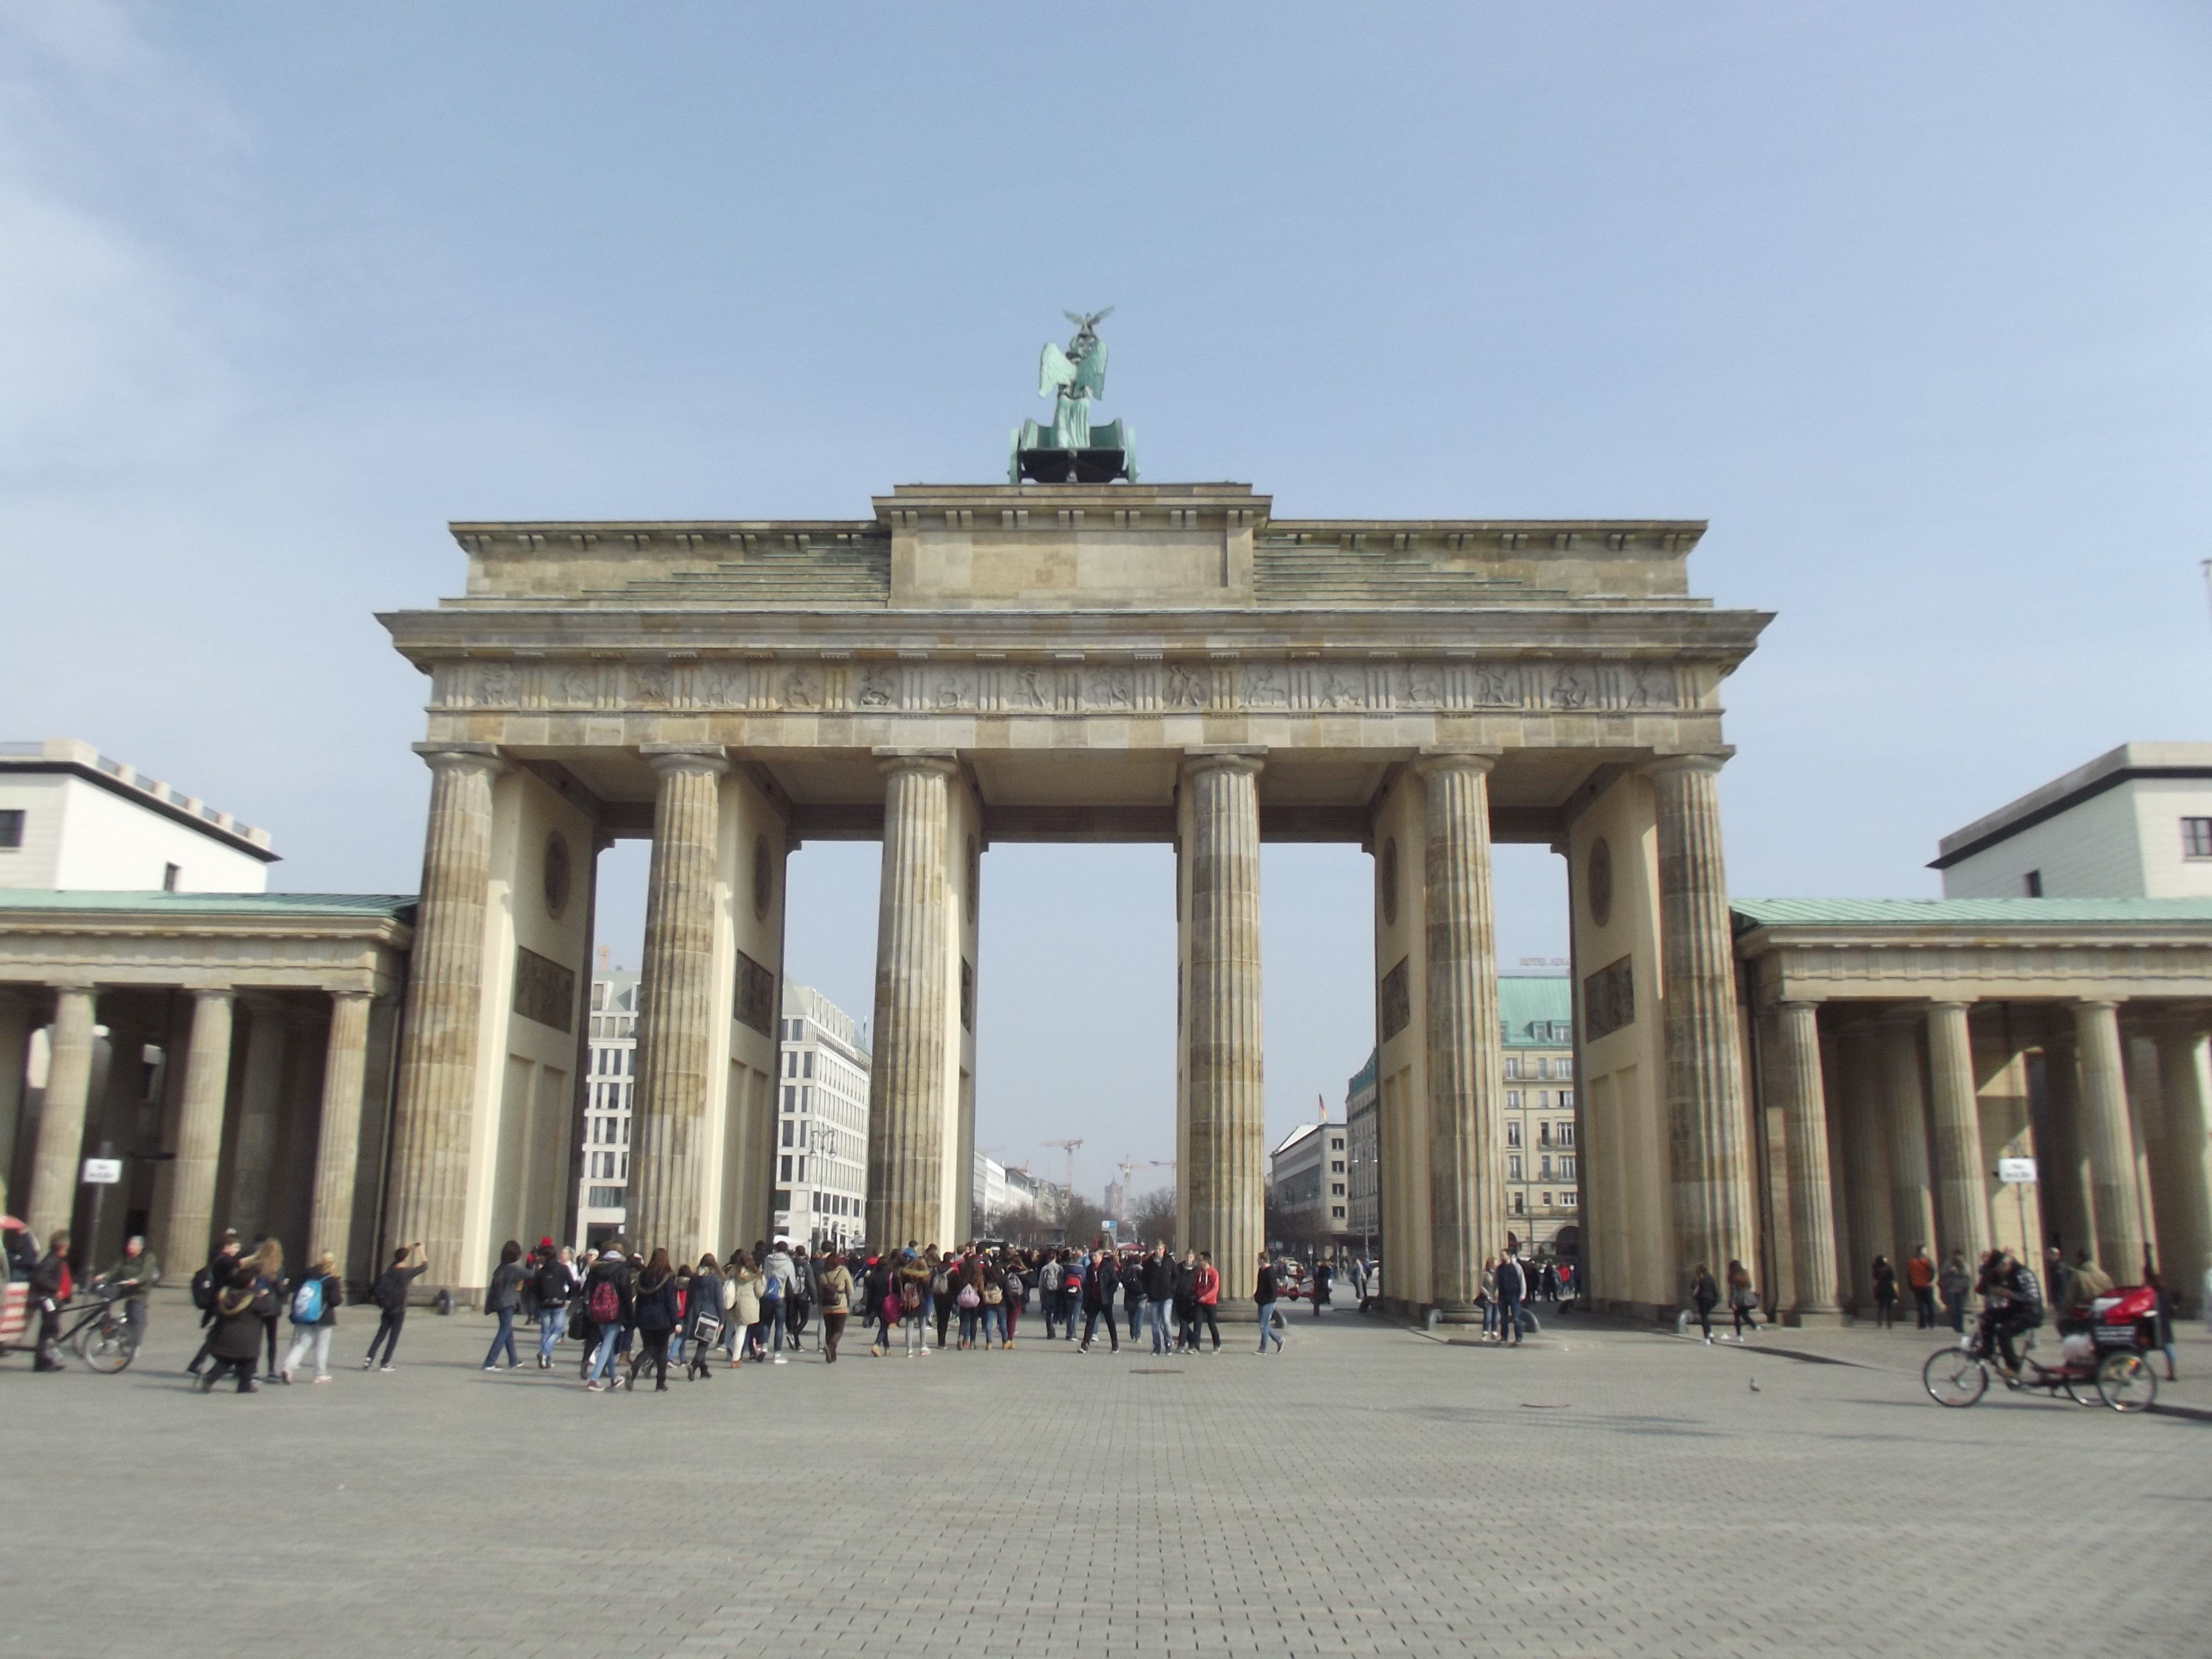 Berlin 2015 – day one and two (23-24 March 2015)